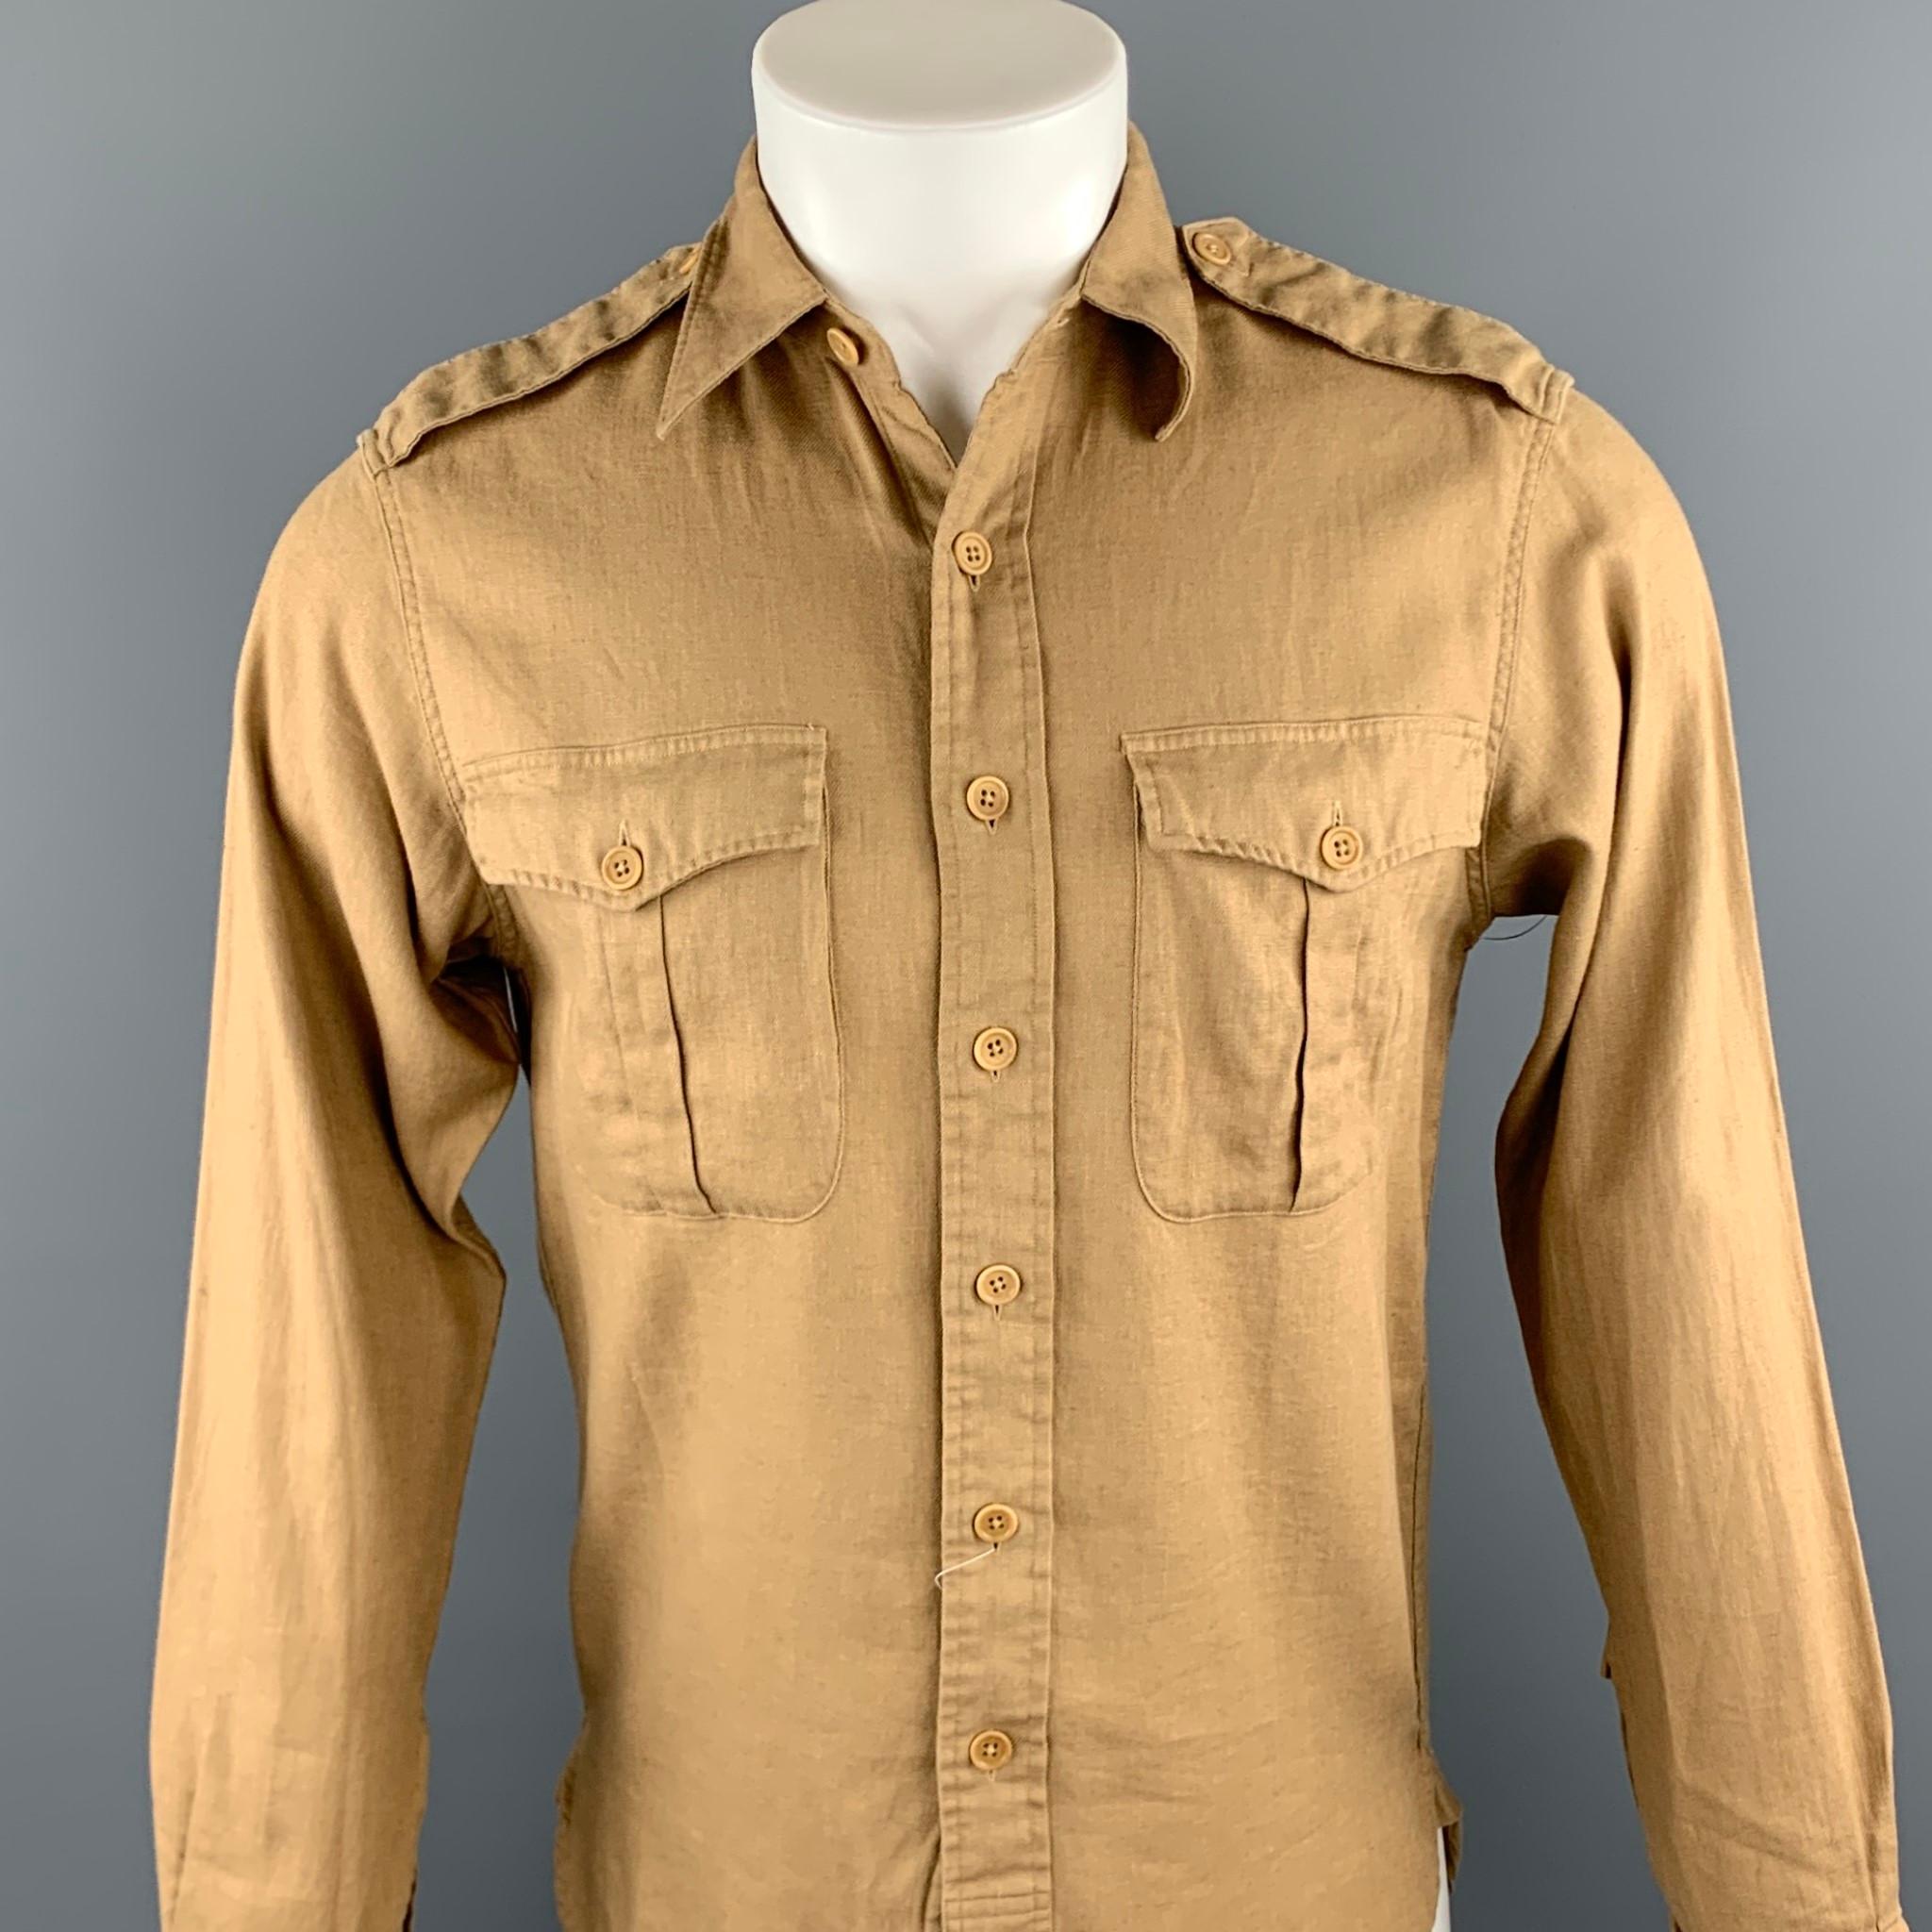 RALPH LAUREN long sleeve shirt comes in a khaki linen / cotton featuring a slim fit button up style, patch pockets, epaulettes, and a spread collar.

New With Tags.
Marked: S

Measurements:

Shoulder: 16 in. 
Chest: 38 in. 
Sleeve: 25 in. 
Length: